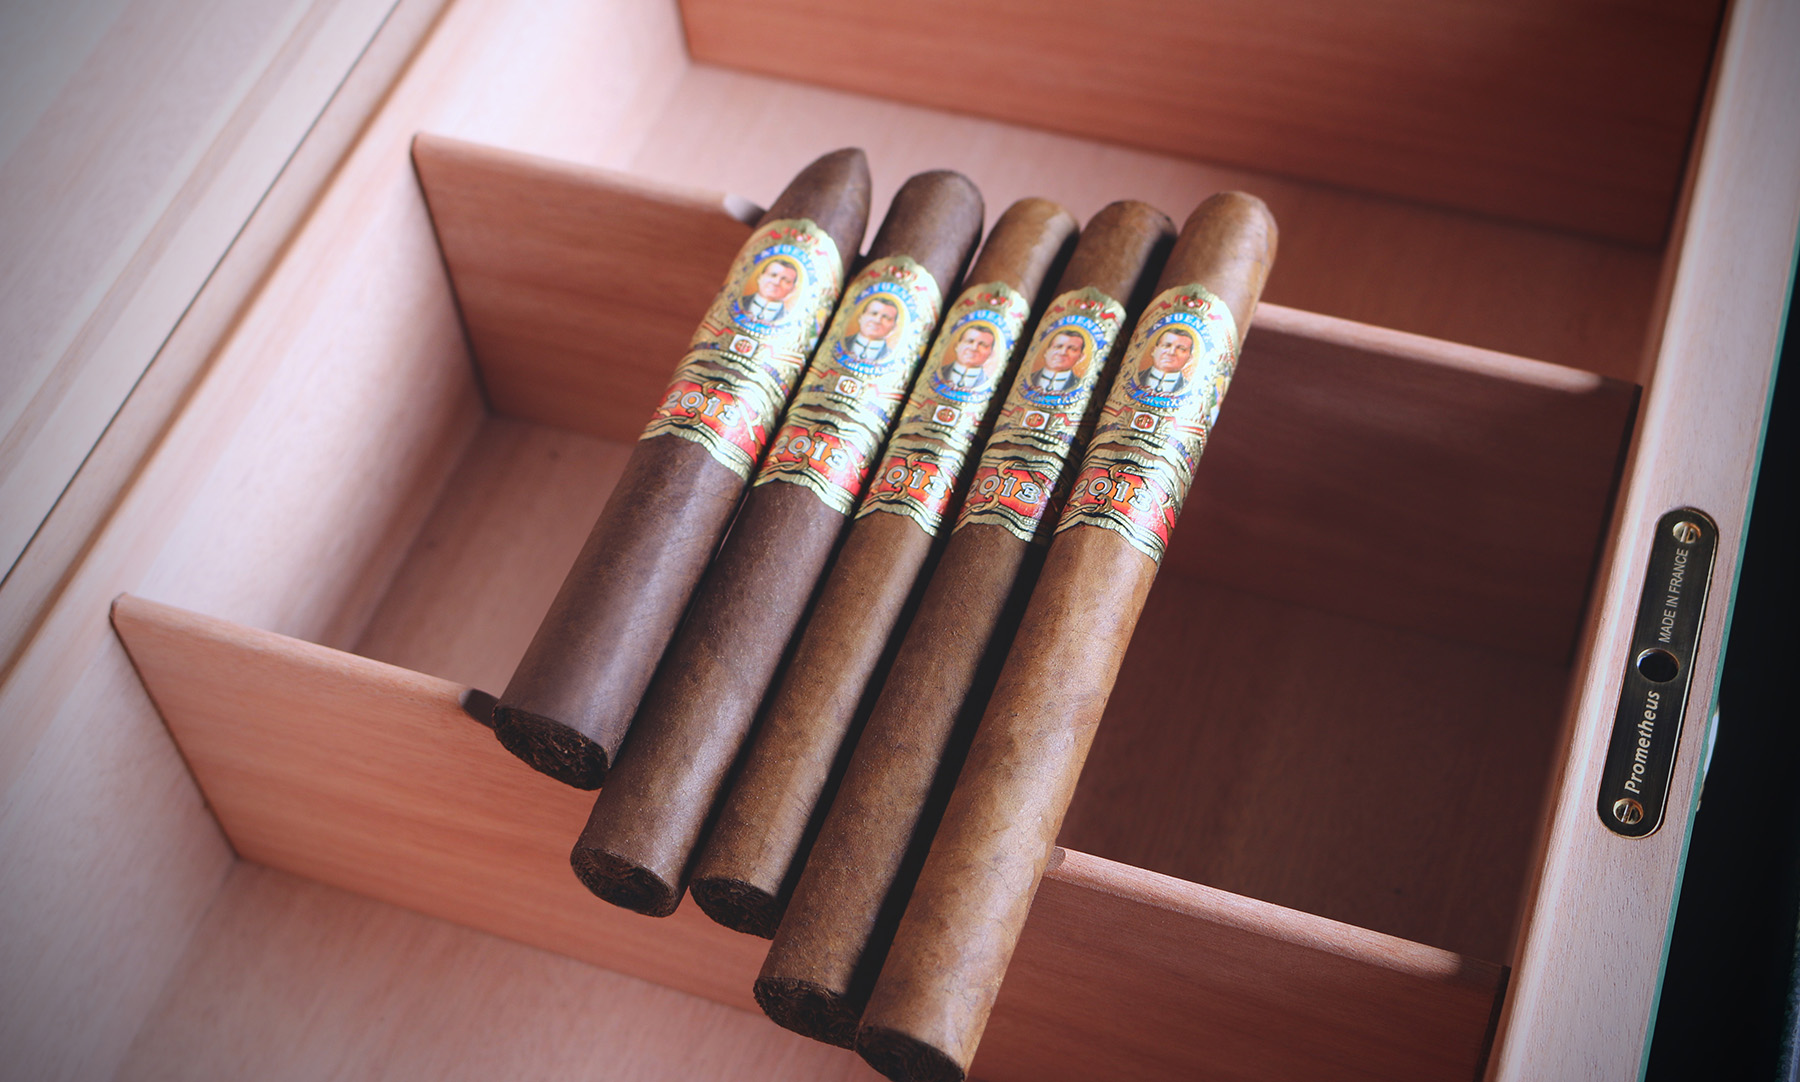  From Left to Right  10 Belicoso Sun Grown  10 Toro Sun Grown  10 Toro Natural  10 Churchill  10 Churchill Gordo  